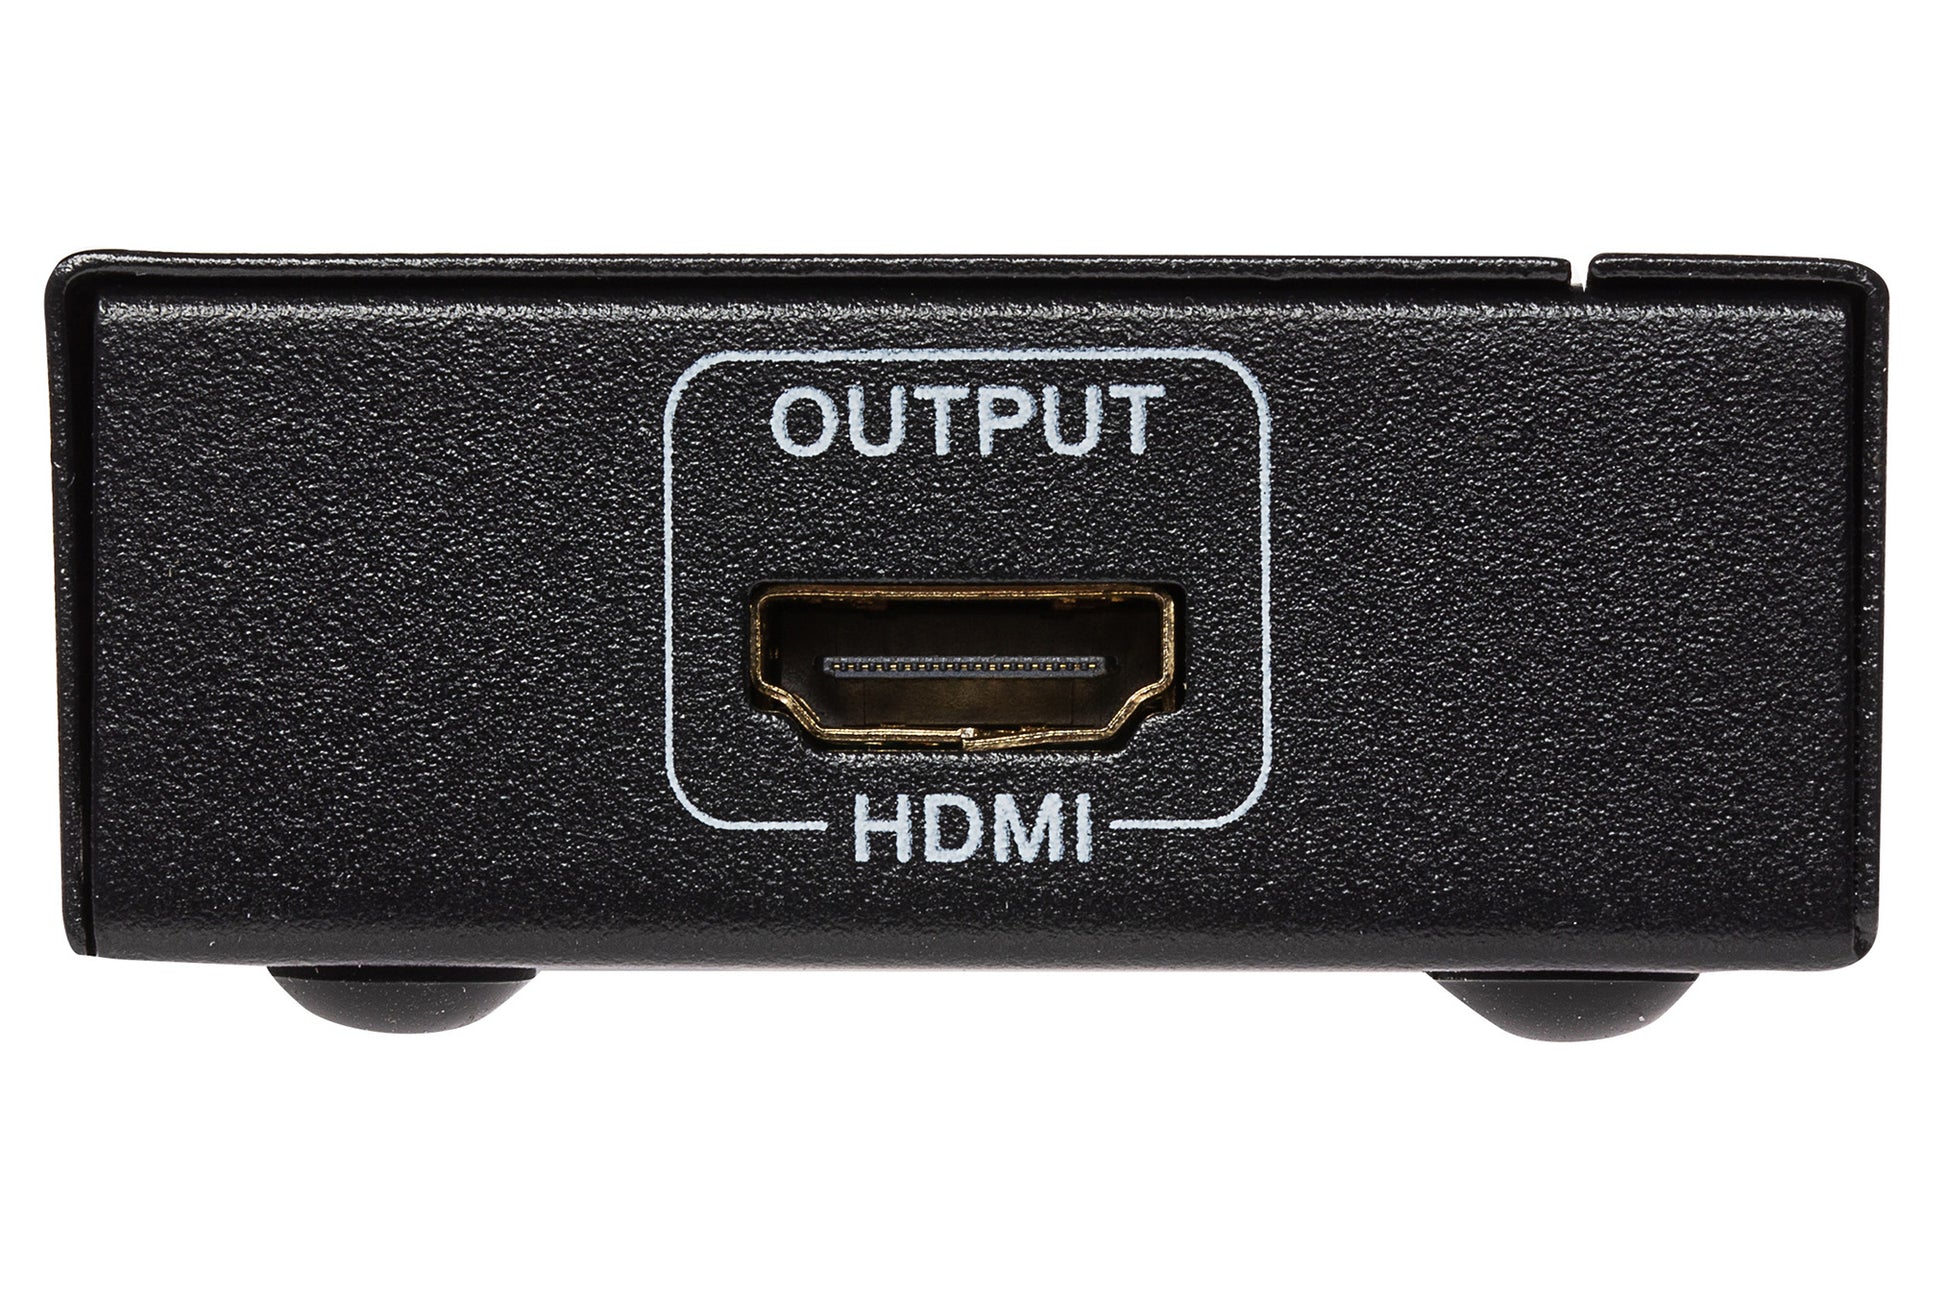 Maplin MPS HDMI Switch 5 Ports In 1 Port Out 4K Ultra HD @30Hz with Remote Control - maplin.co.uk